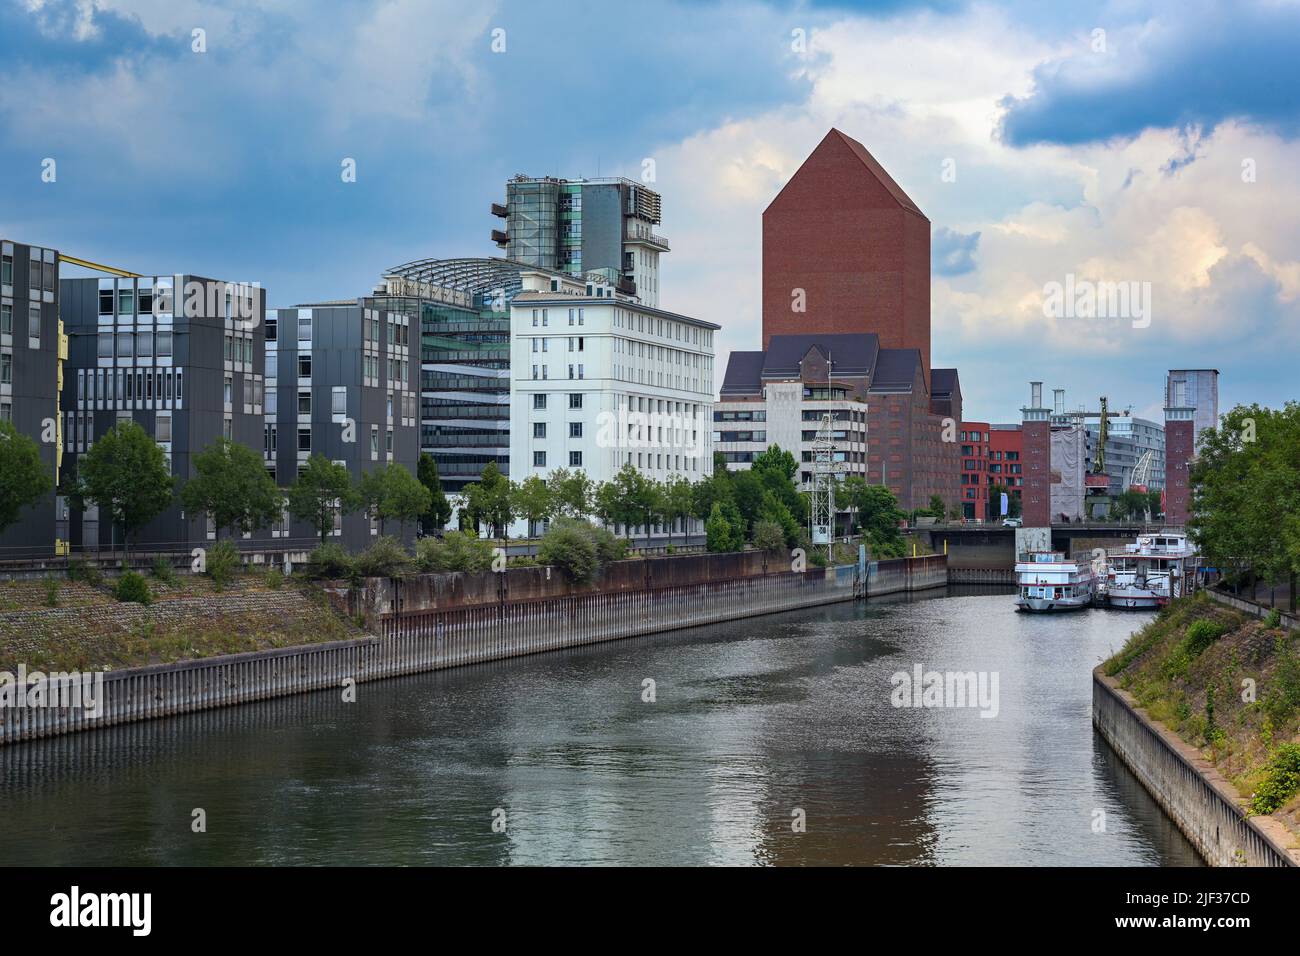 Inner harbor of Duisburg, Germany with the State archive of North Rhine-Westphalia, the monumental tower building of red brick without windows was a f Stock Photo